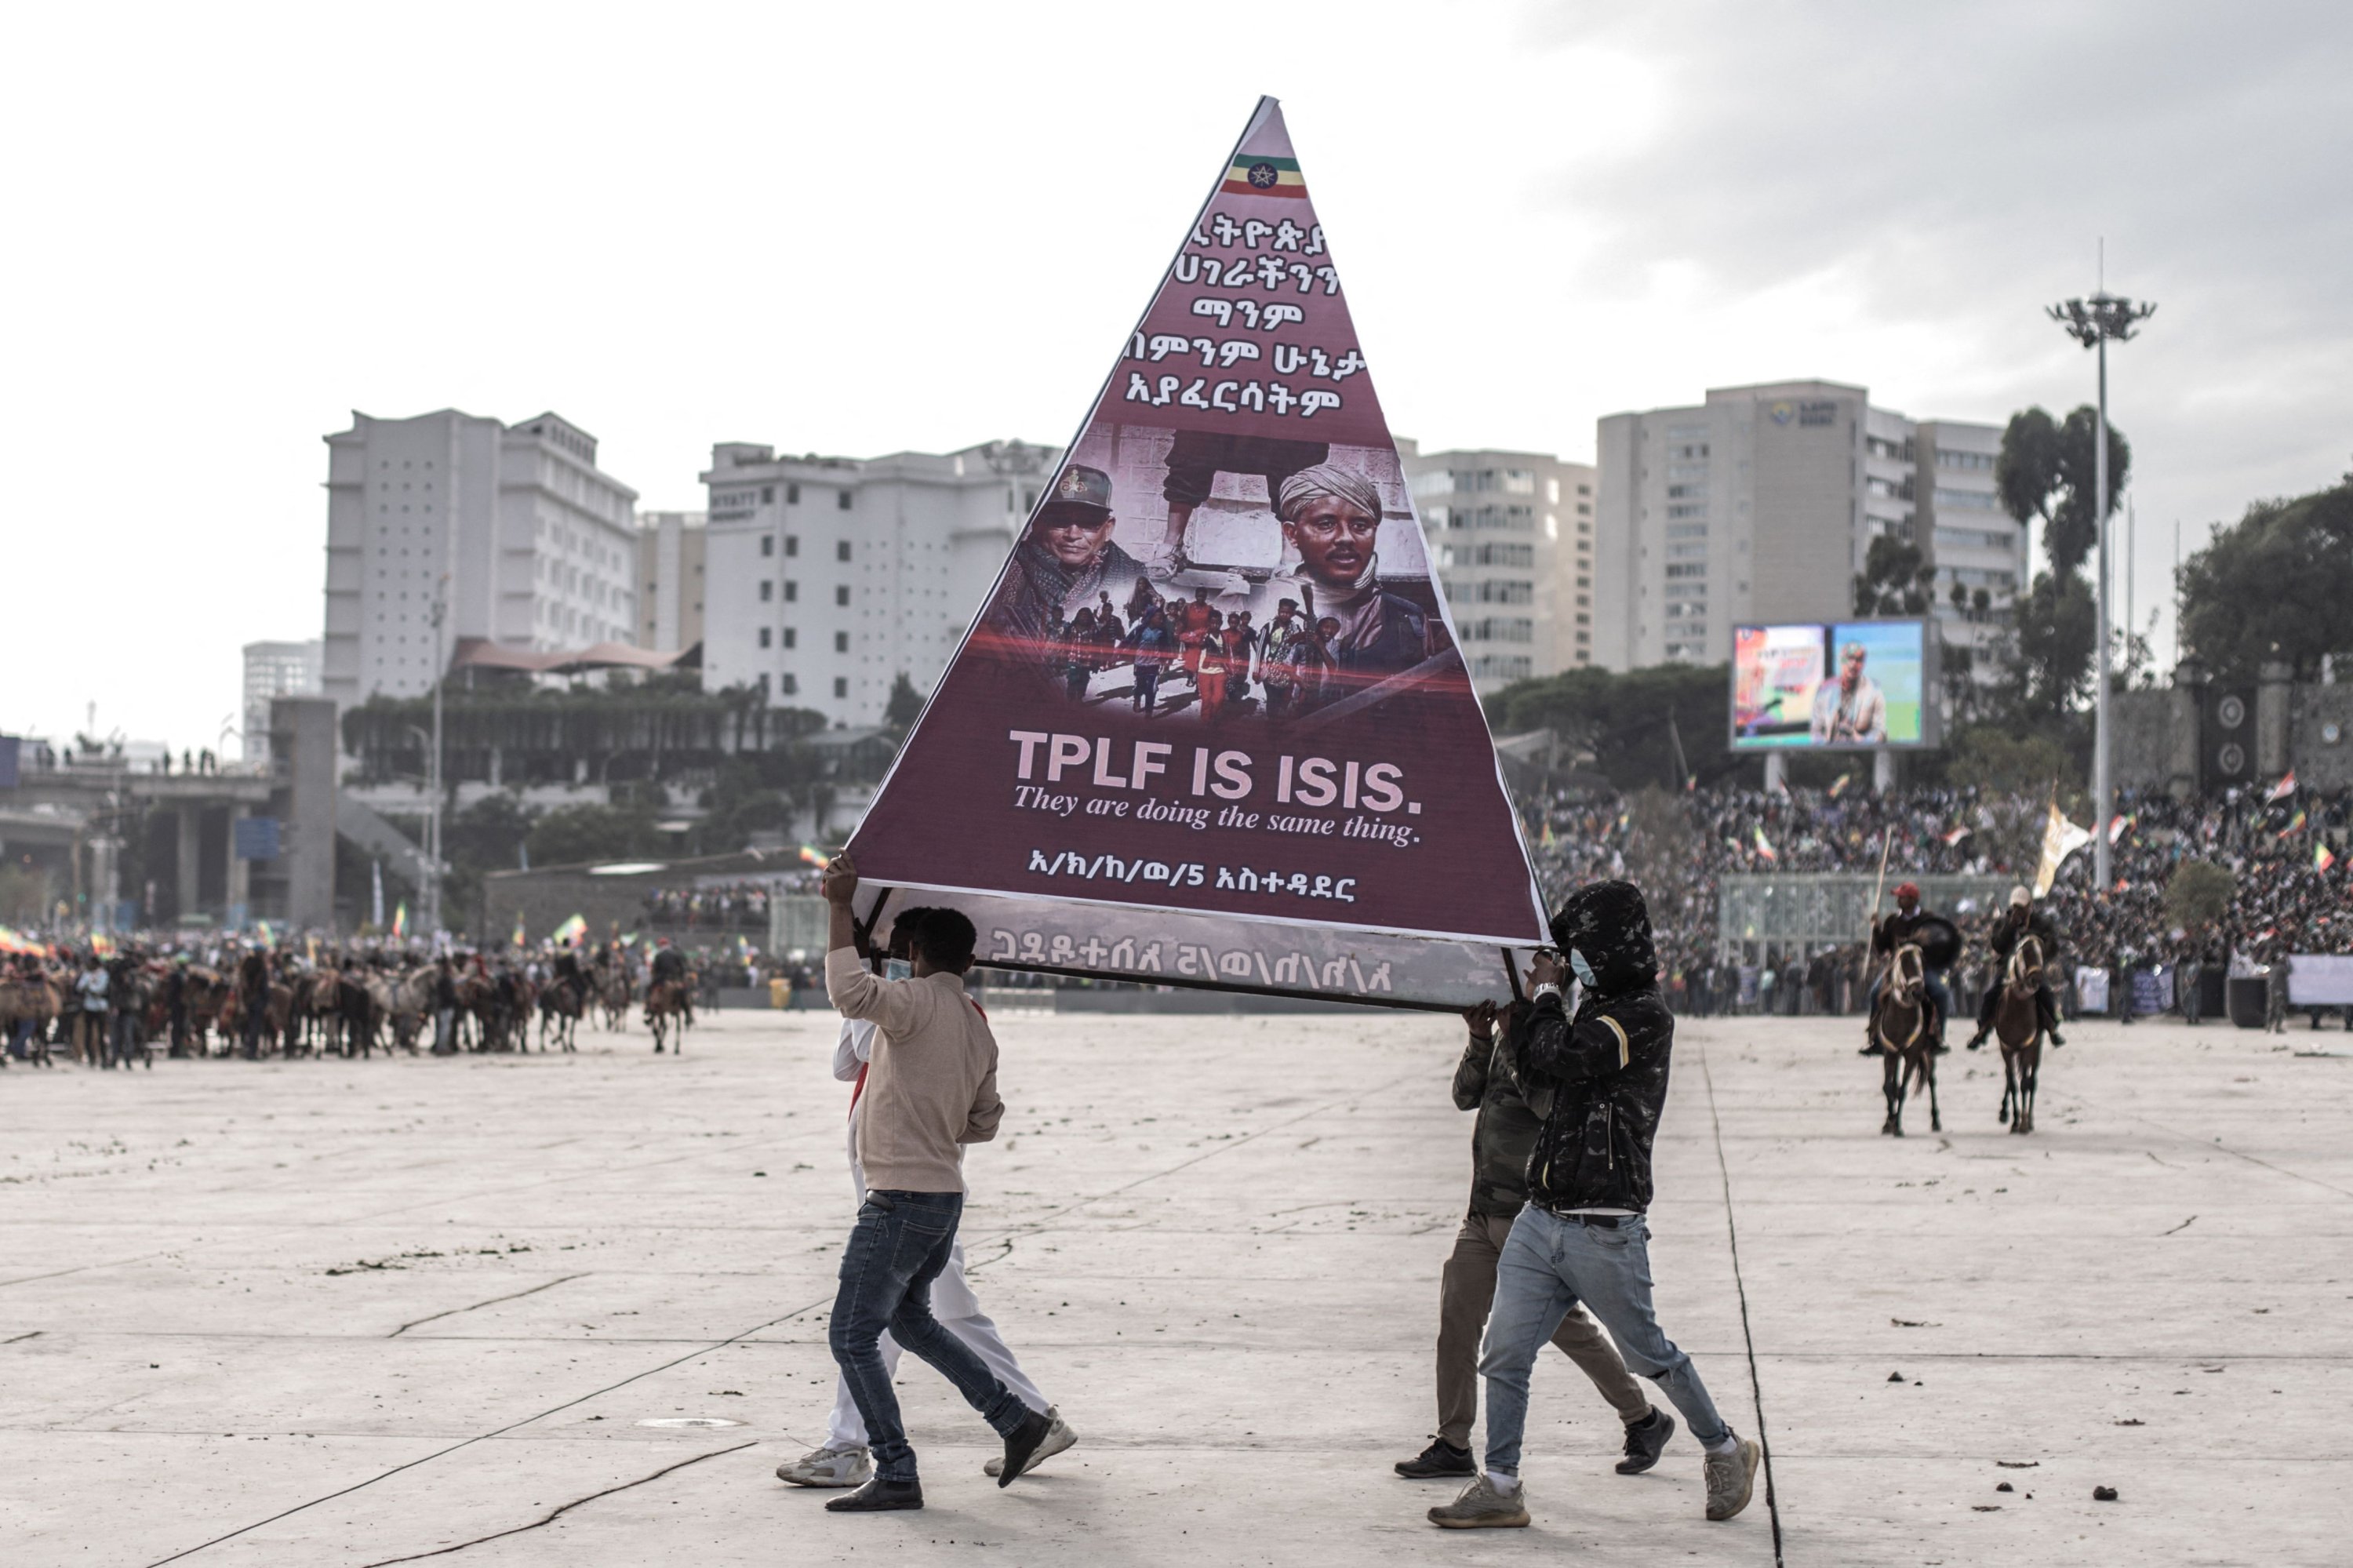 Protesters carry a banner during a rally against TPLF forces (Tigray People's Liberation Front) and in support of Ethiopia's armed forces in Addis Ababa on Aug. 8, 2021. (AFP Photo)